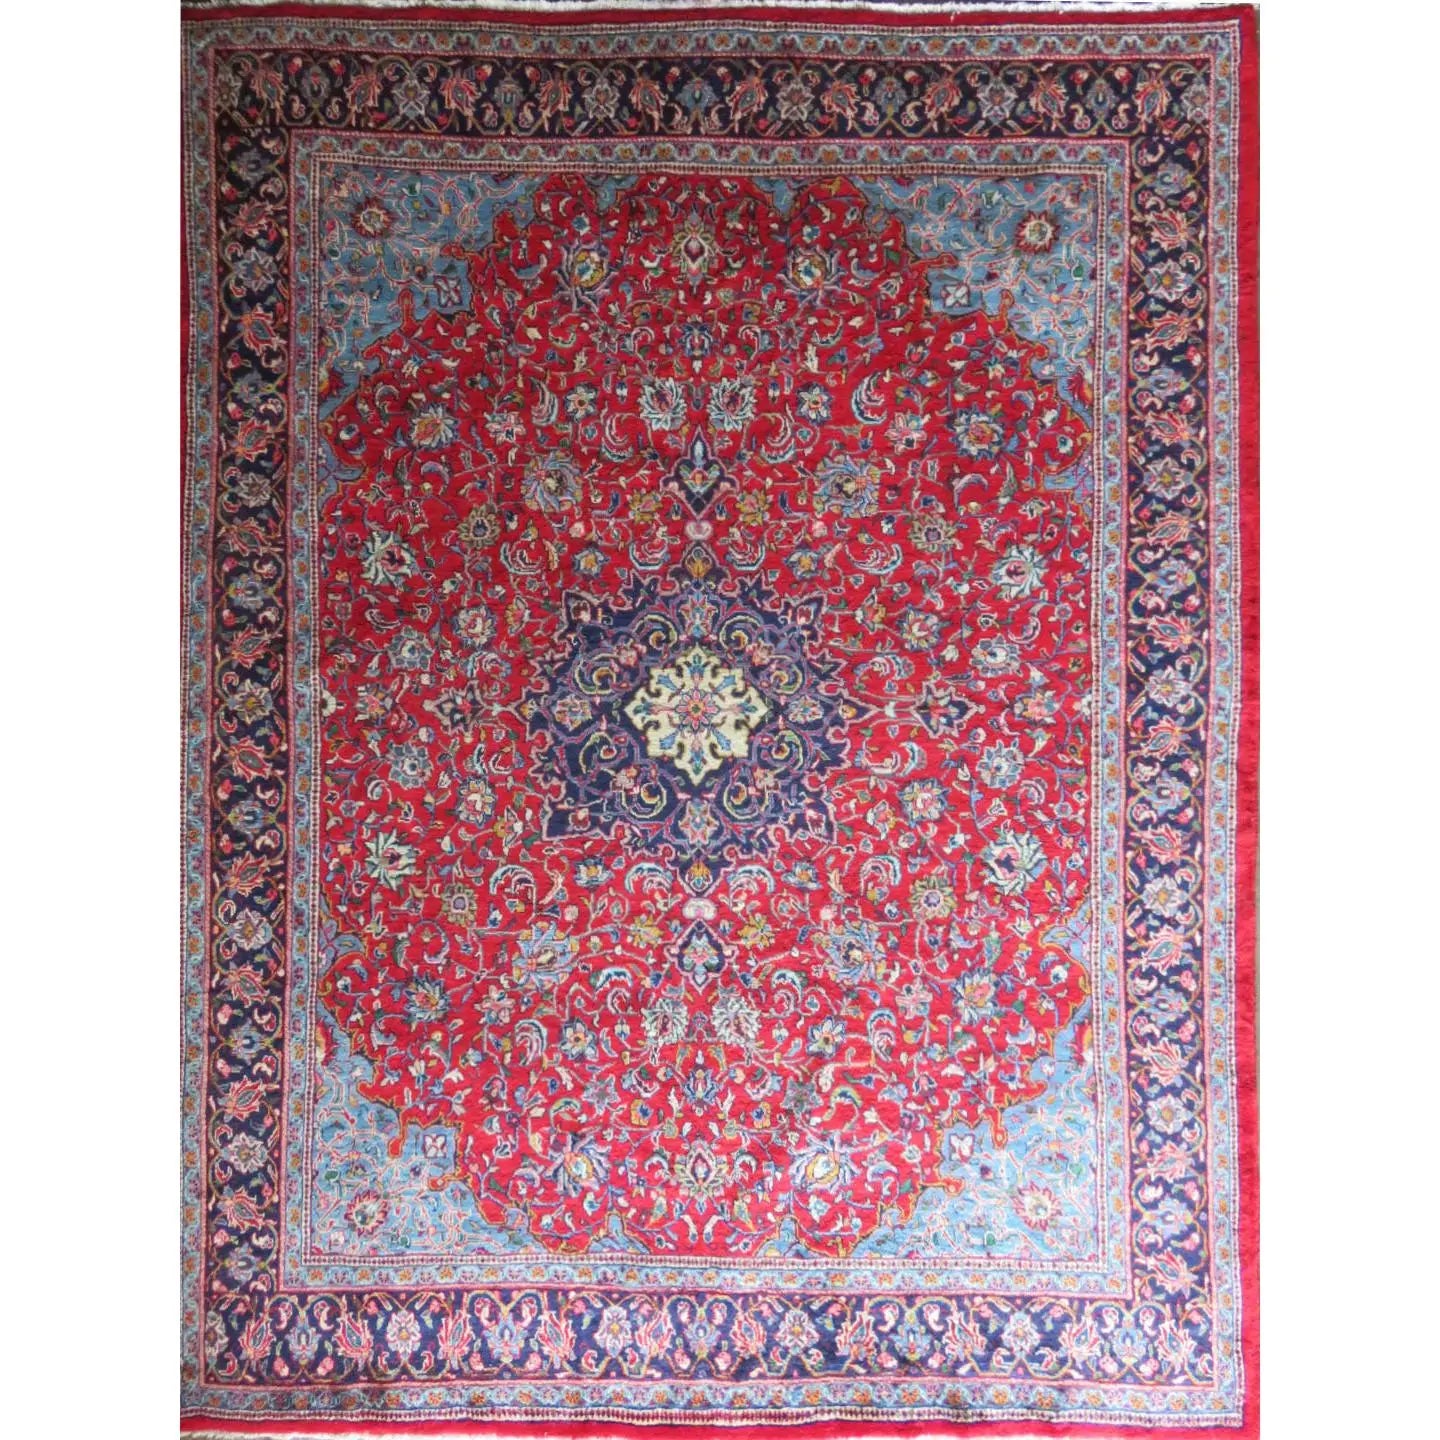 Hand-Knotted Persian Wool Rug _ Luxurious Vintage Design, 12'8" X 9'8", Artisan Crafted